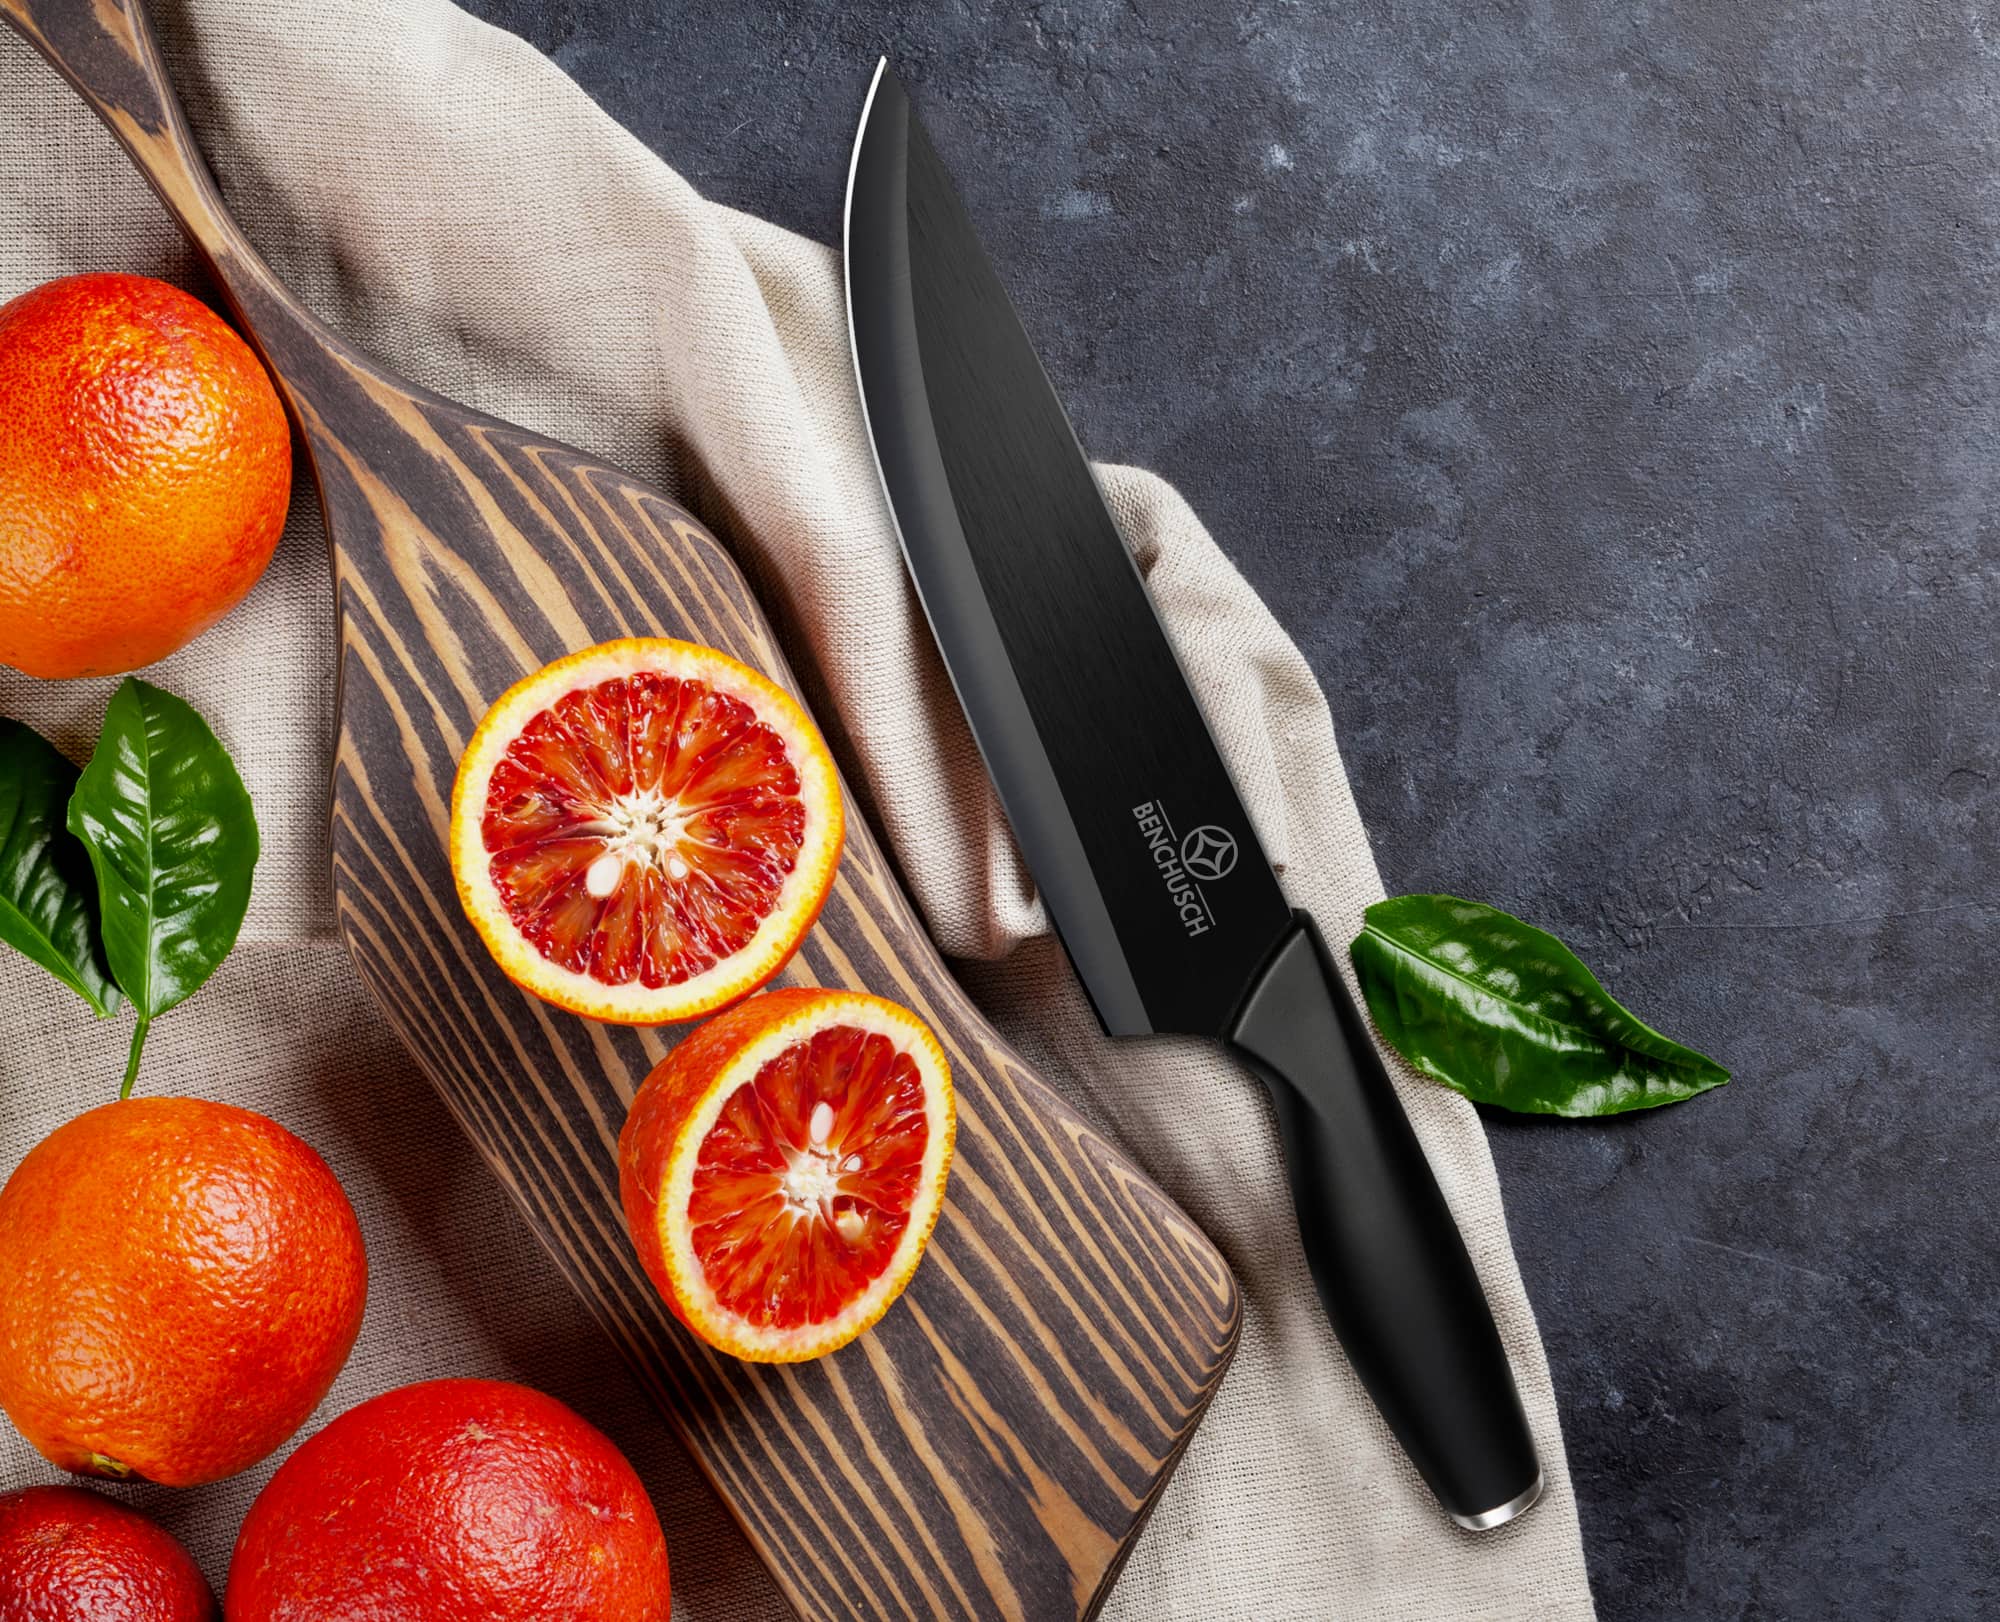 Benchusch Ceramic Knife 7 inch with cutting red orange and the chopping board on the dark background